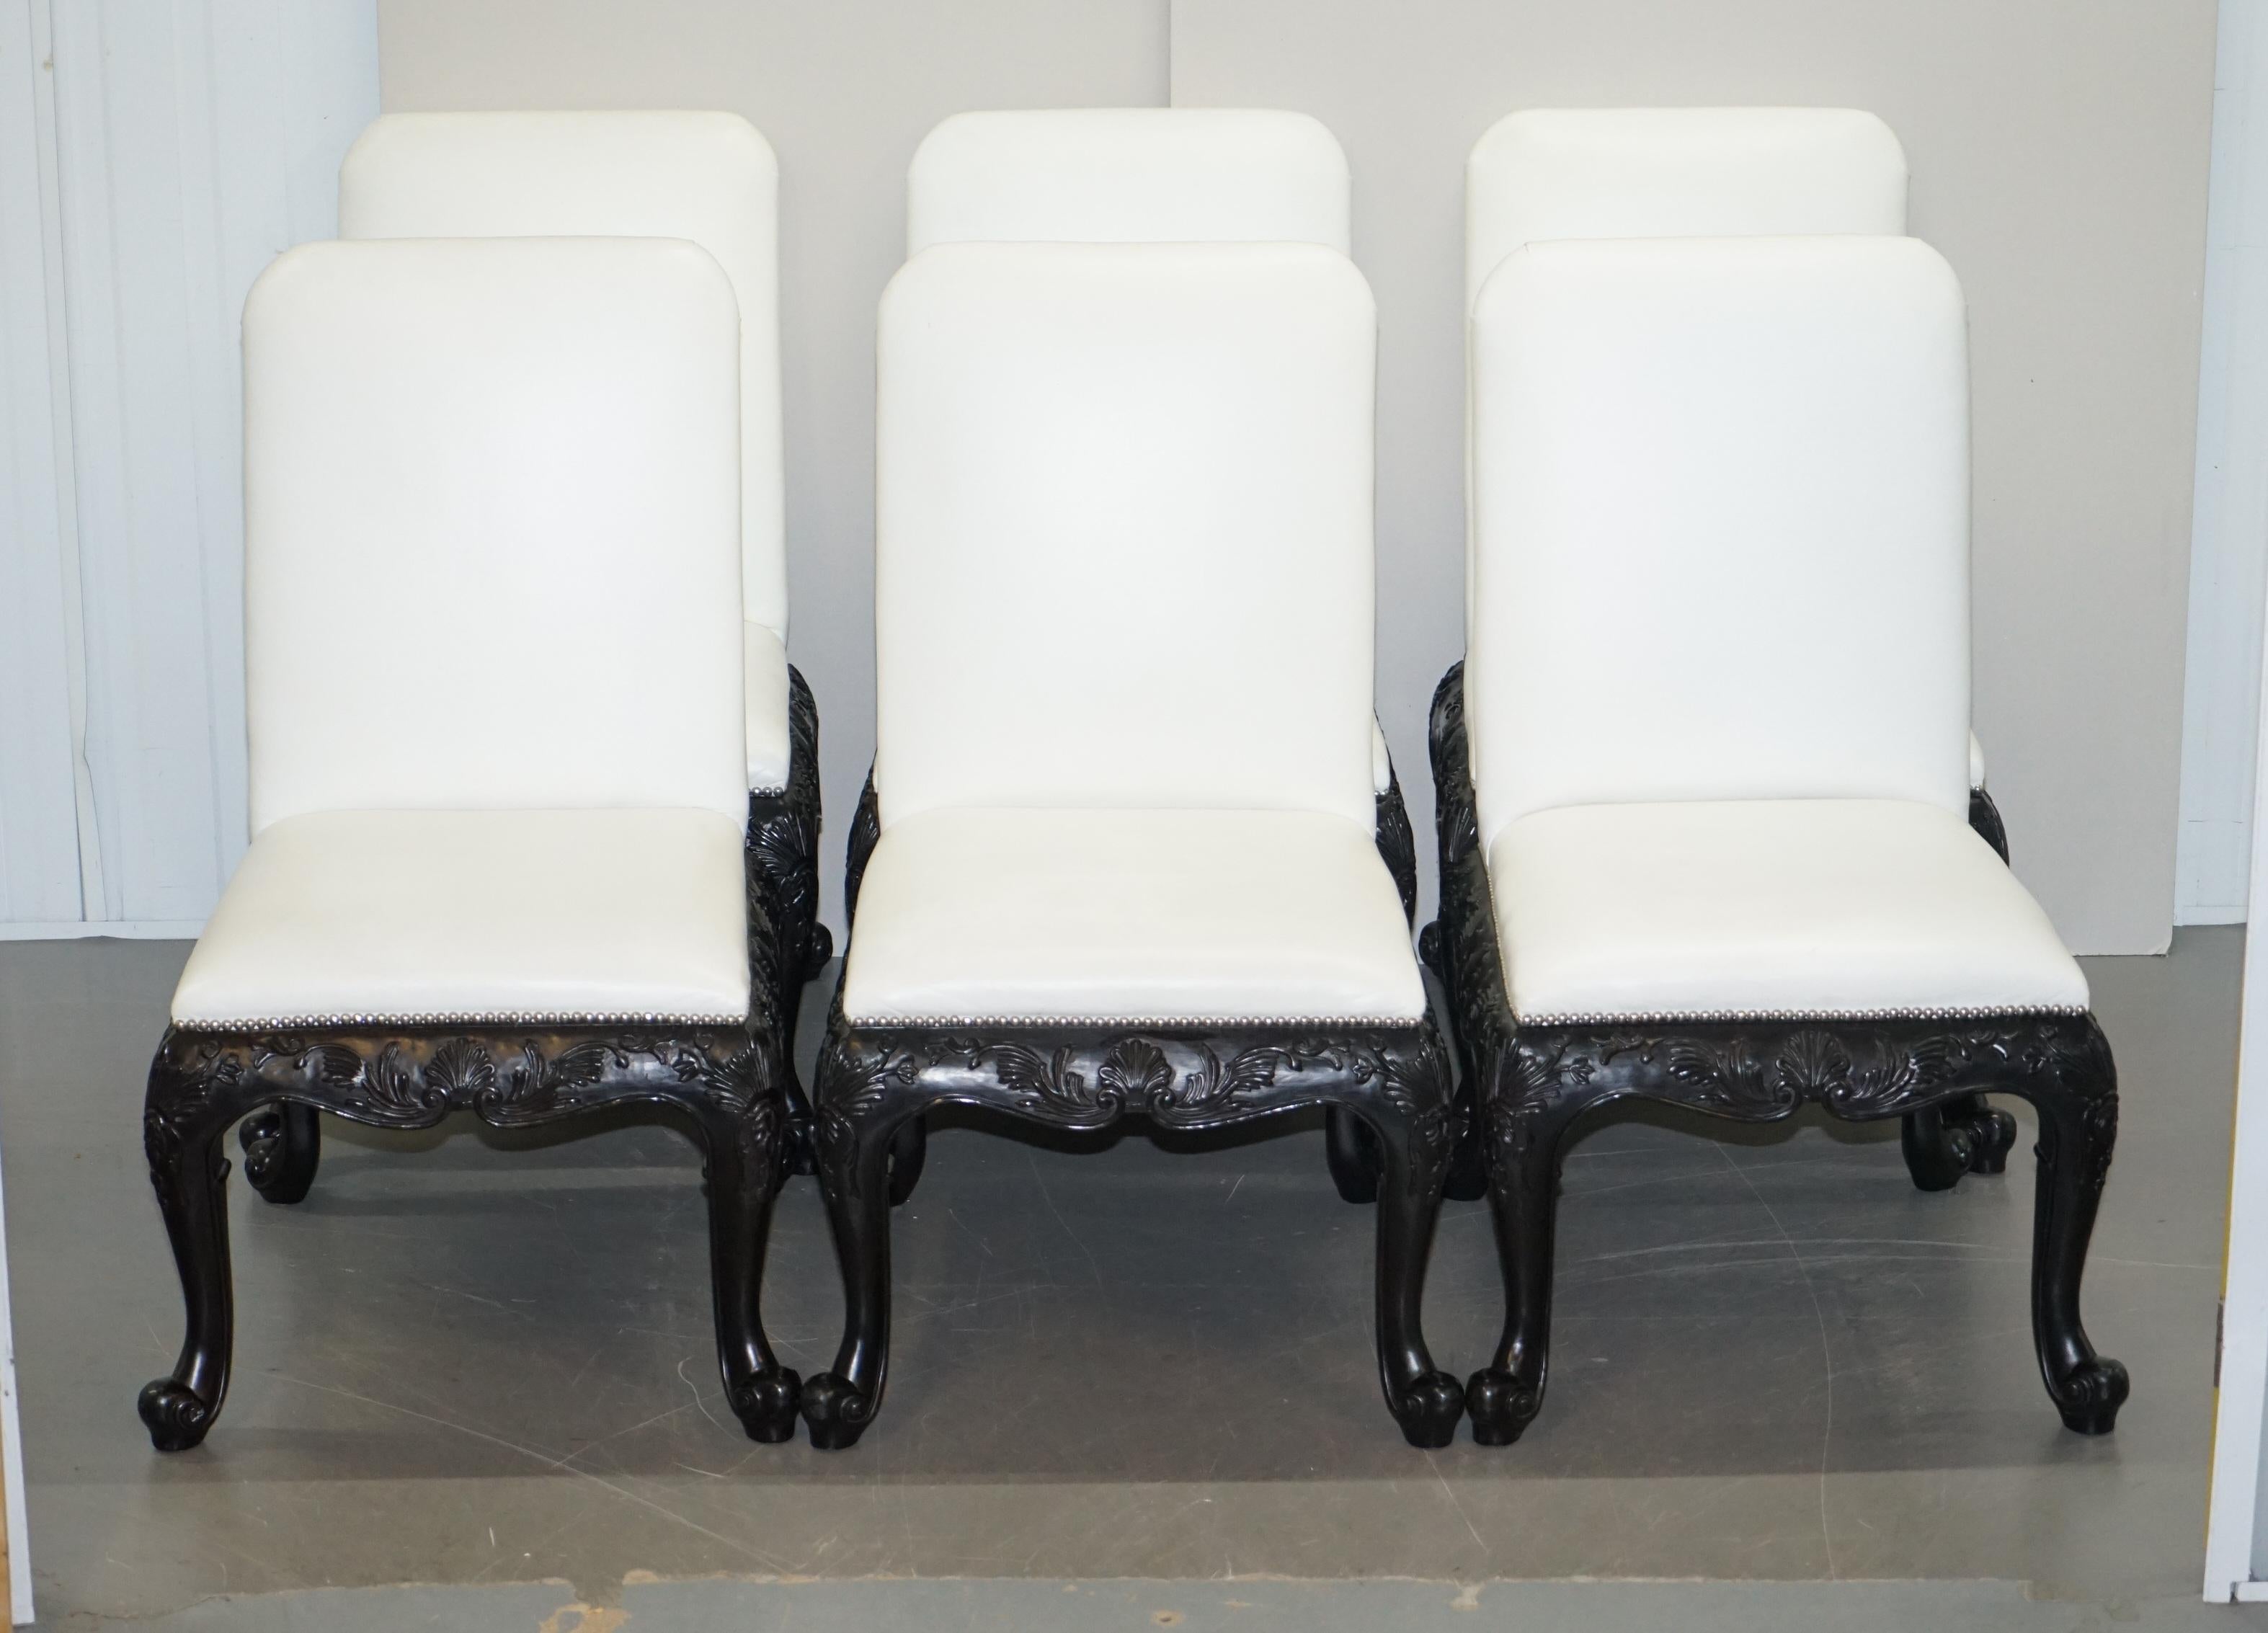 We are delighted to offer for sale this lovely suite of six Ralph Lauren Bel Air white leather dining chairs RRP £27,000

A very well made and decorative suite of designer dining chairs, they retail for a whopping £4,500 per chair with the white